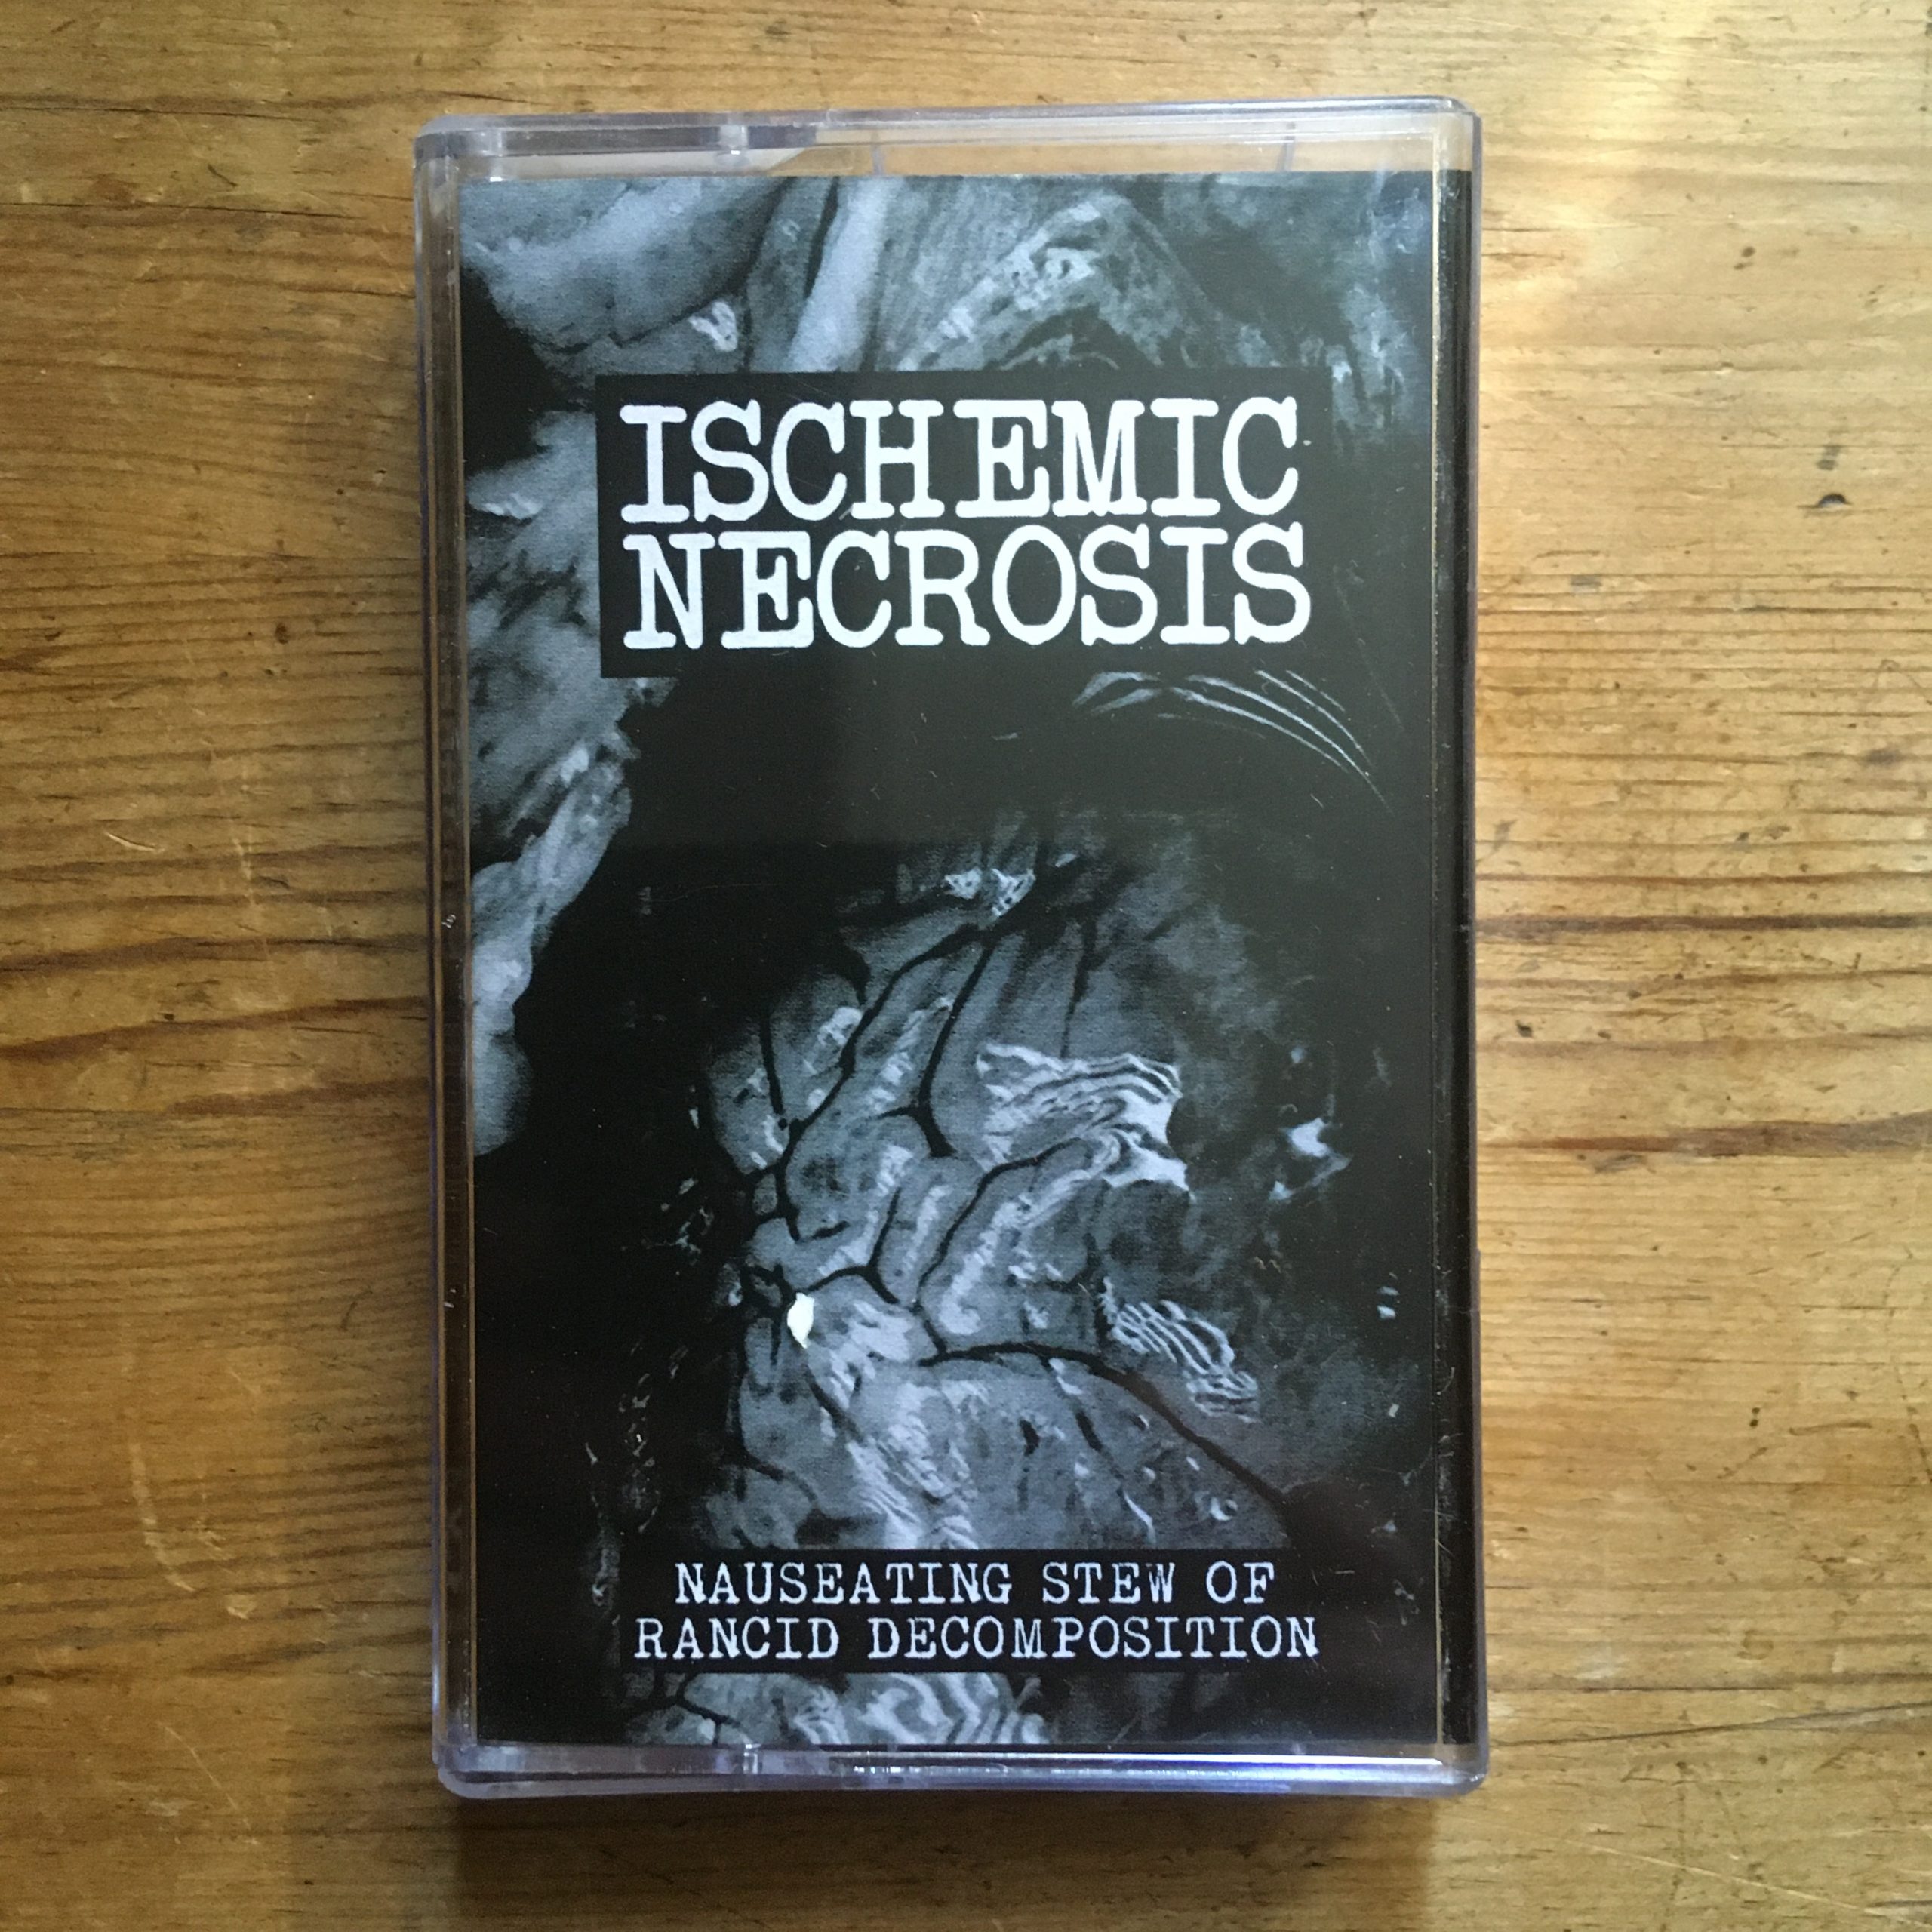 Photo of the Ischemic Necrosis - "Nauseating Stew Of Rancid Decomposition" MC